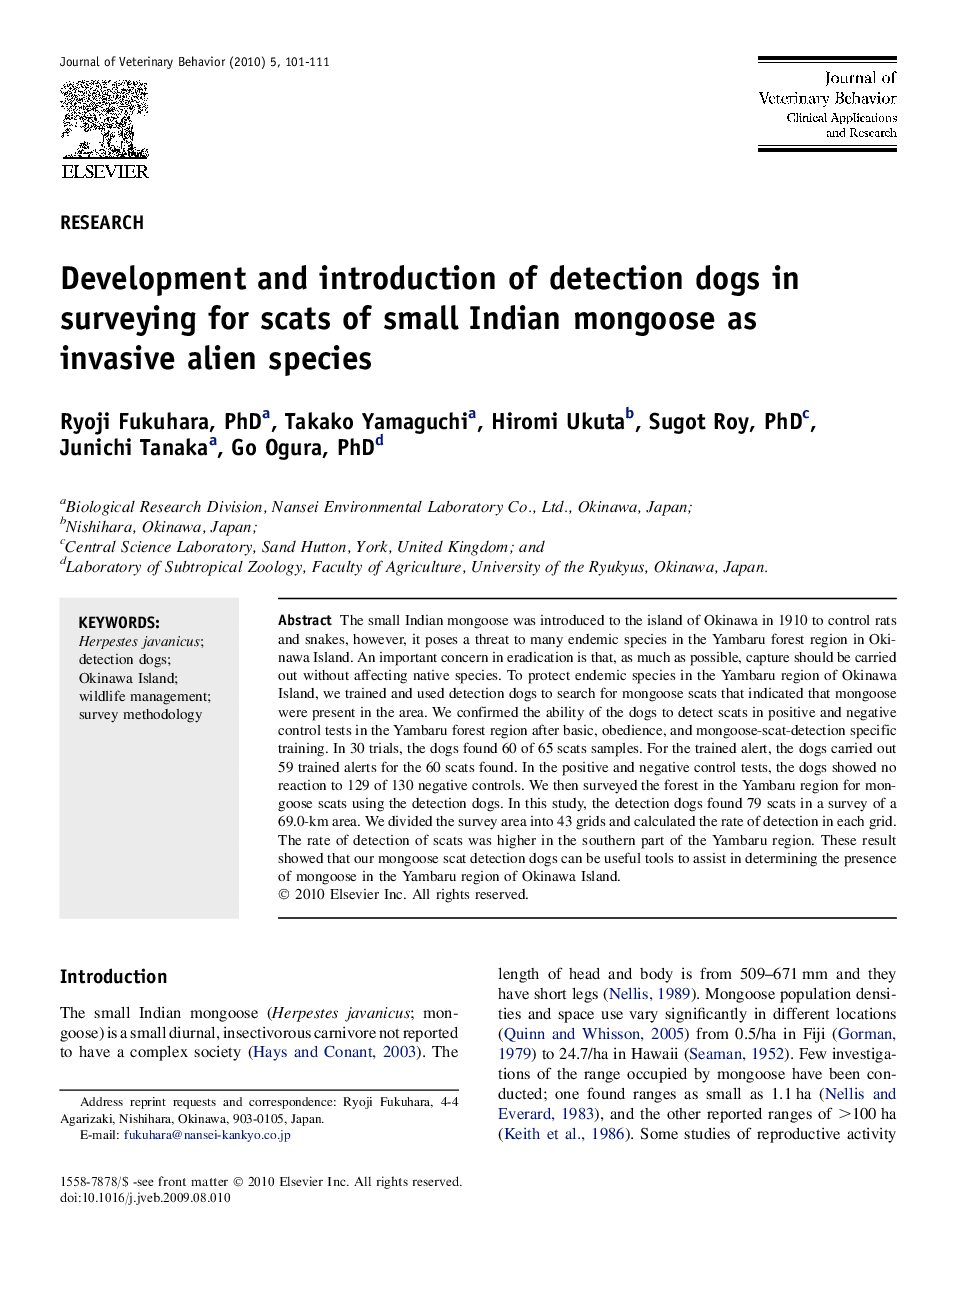 Development and introduction of detection dogs in surveying for scats of small Indian mongoose as invasive alien species